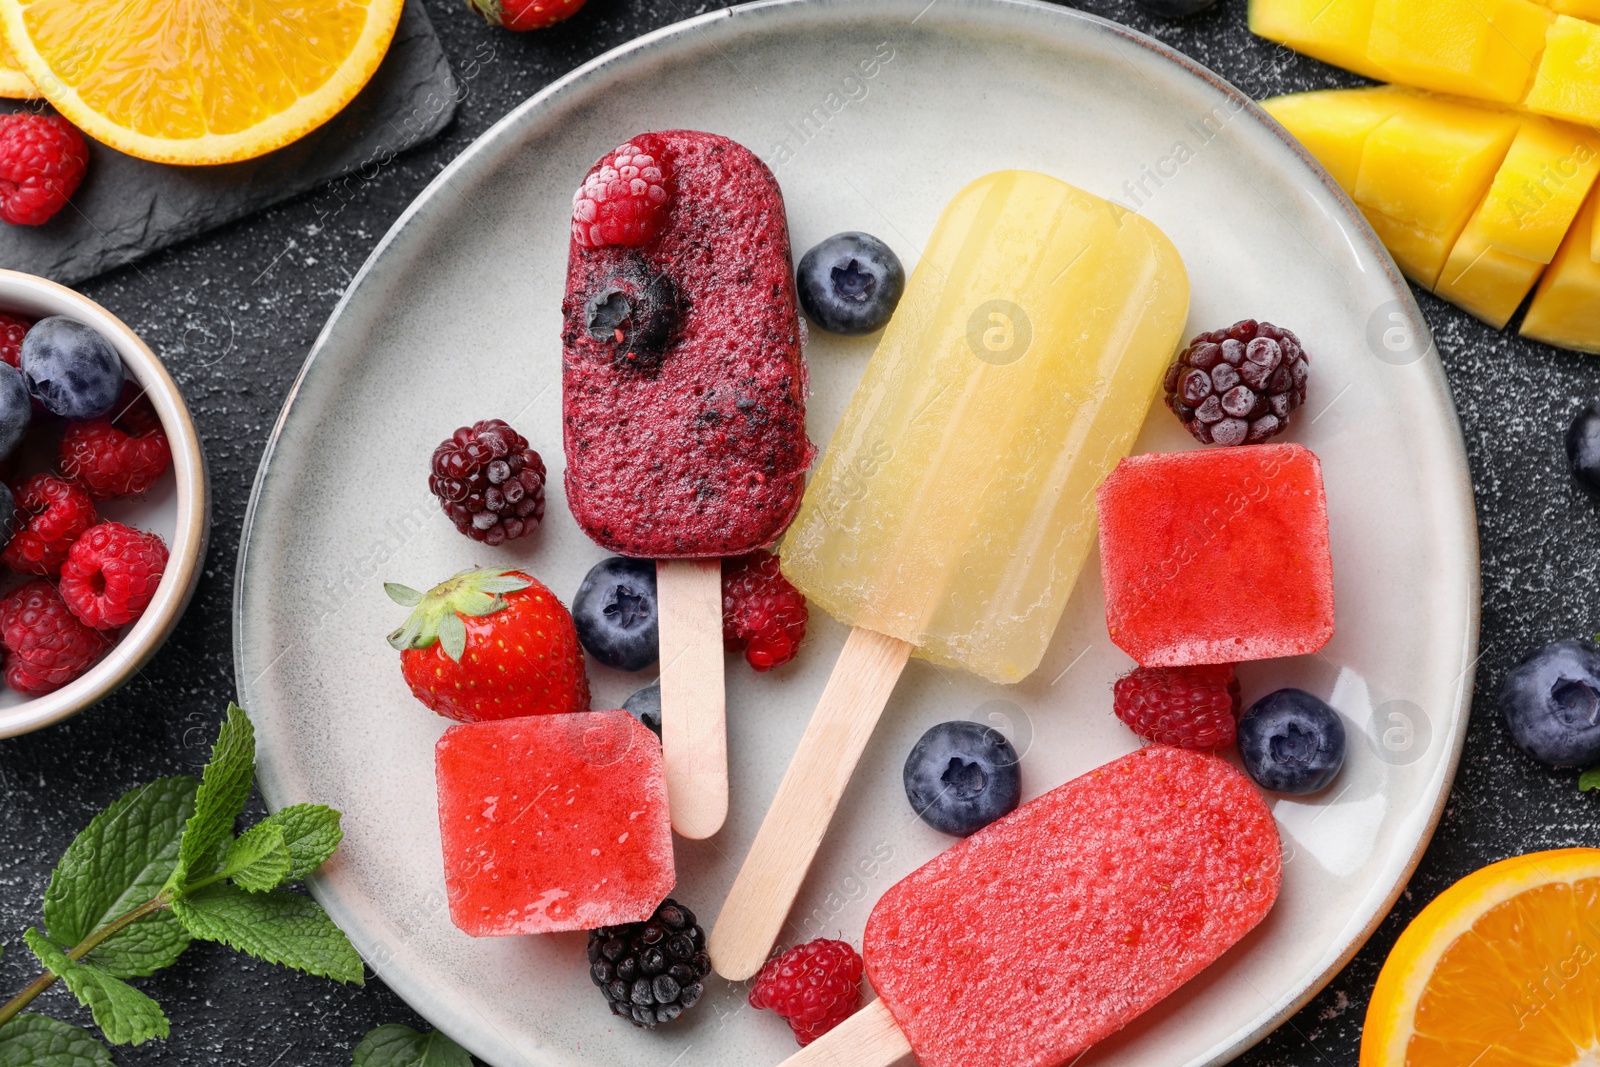 Photo of Plate of different tasty ice pops on black textured table, flat lay. Fruit popsicle